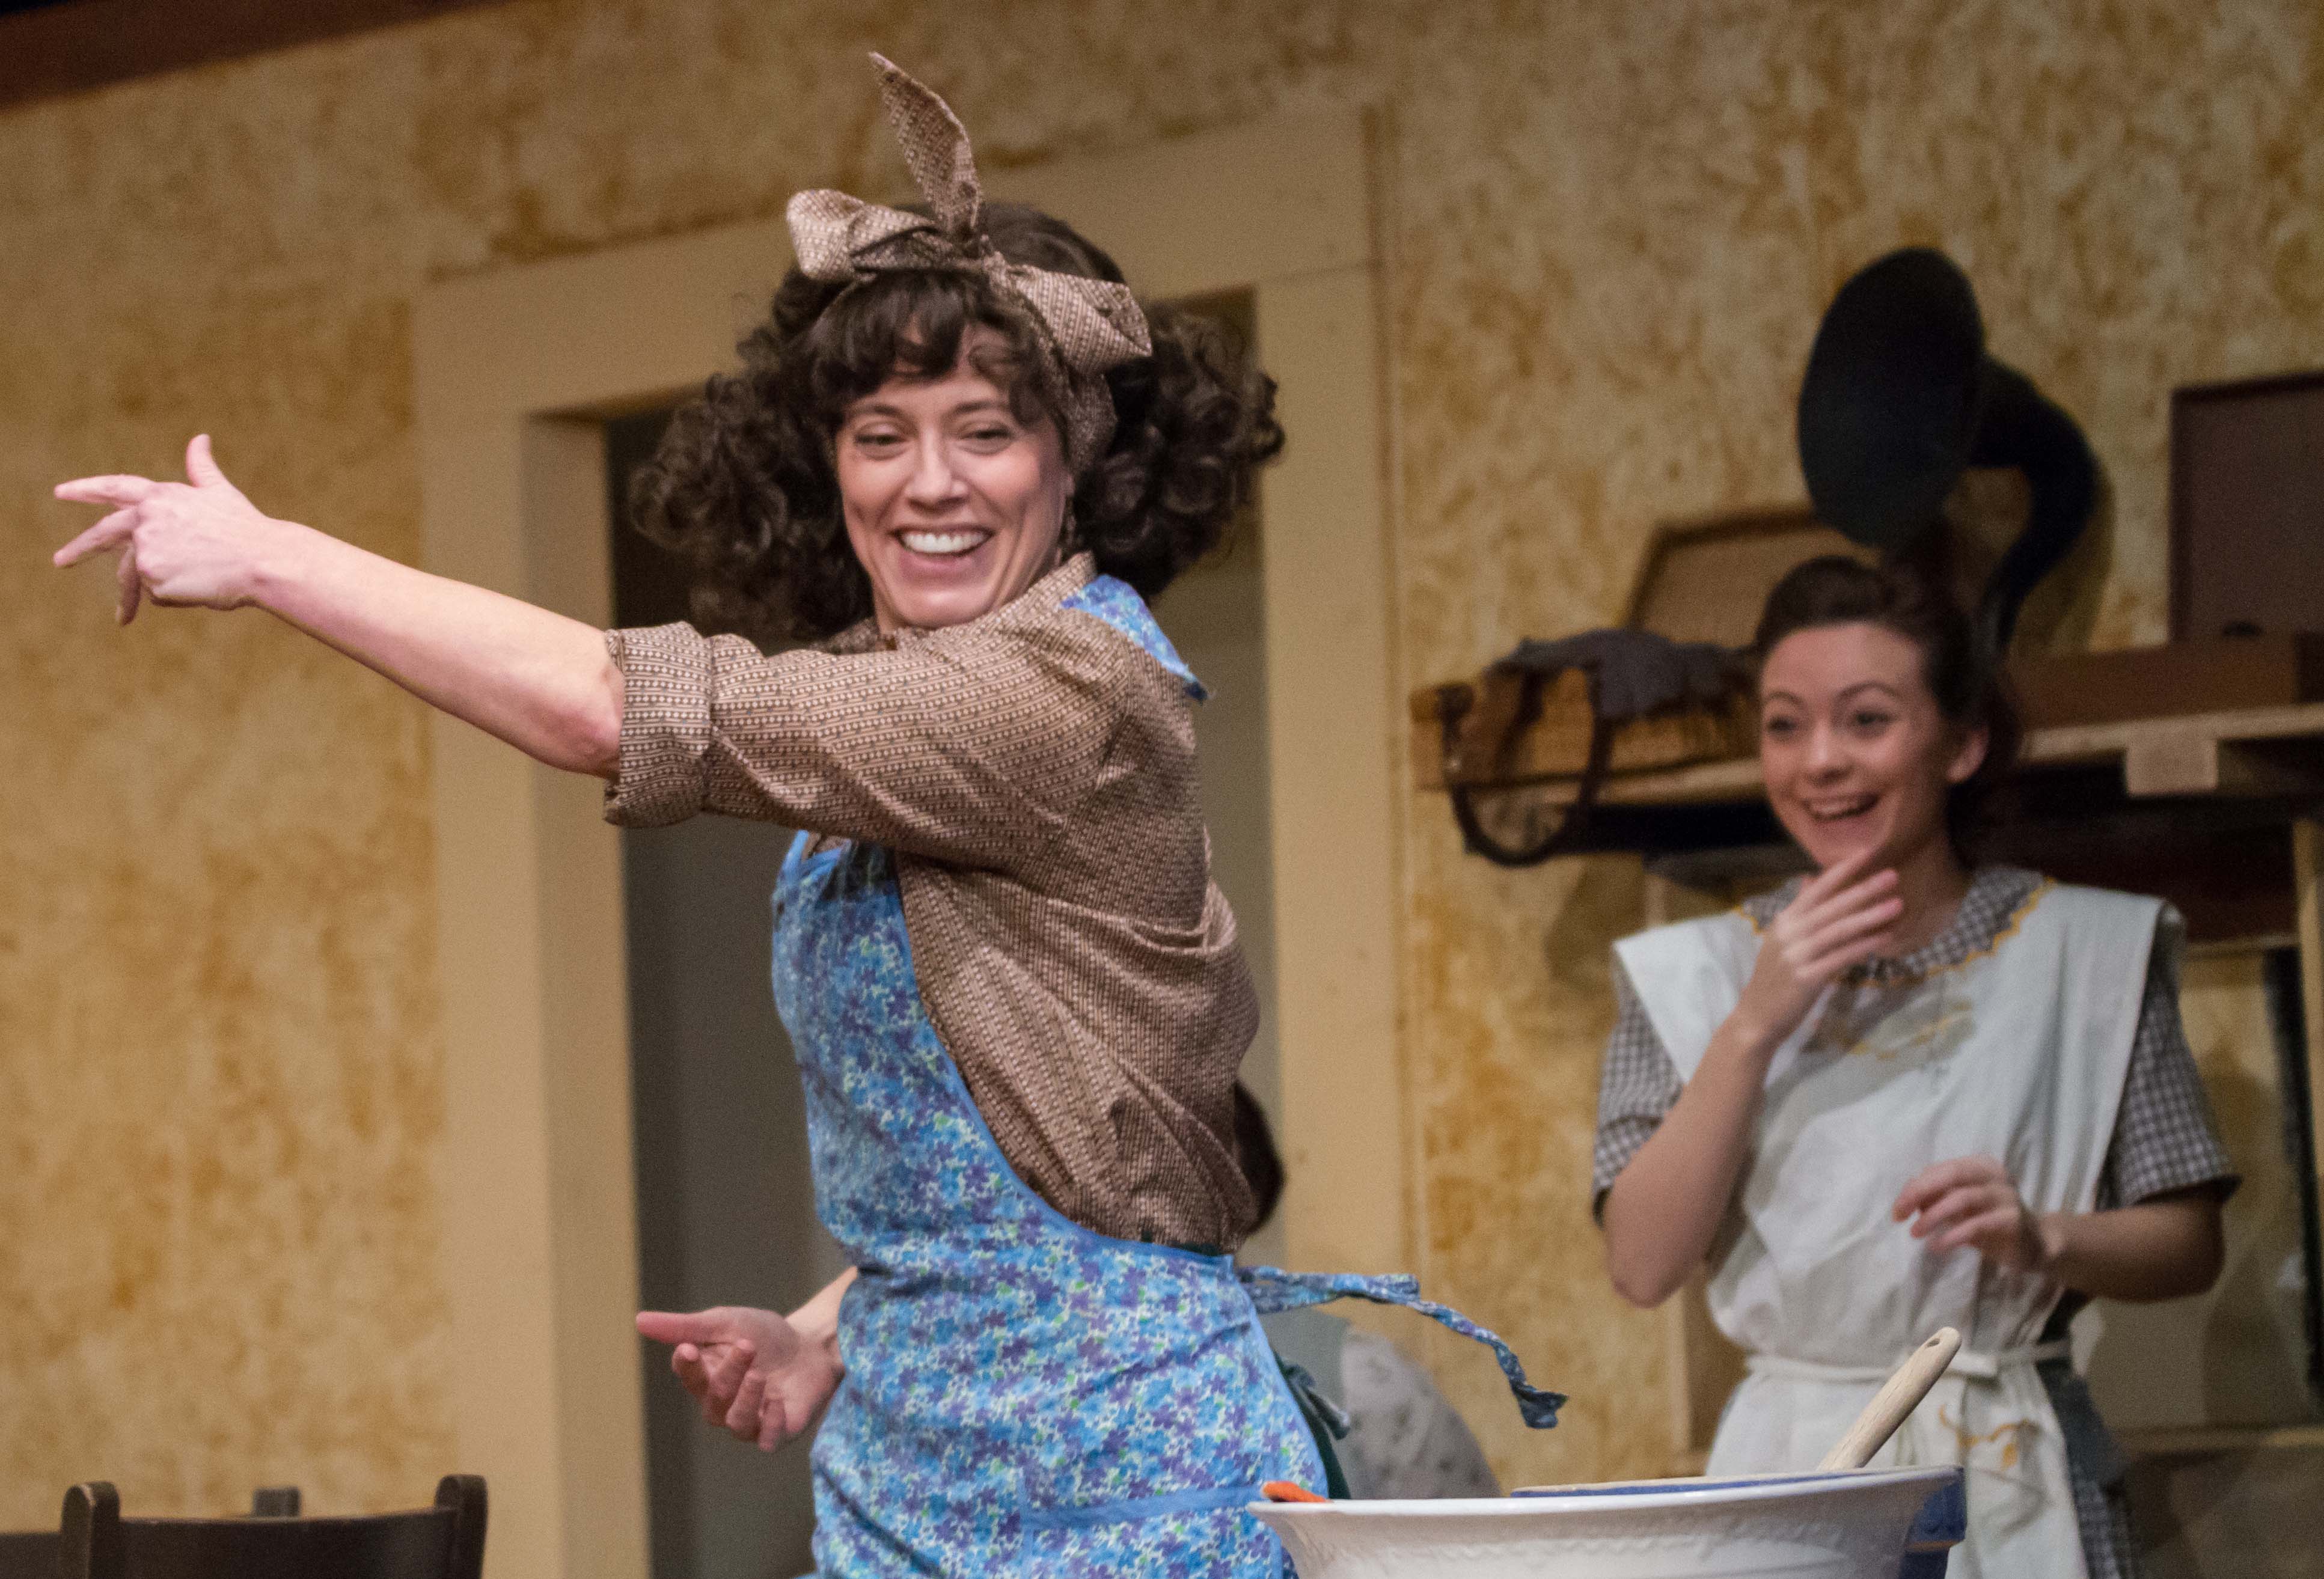 Just four more chances to see Dancing at Lughnasa